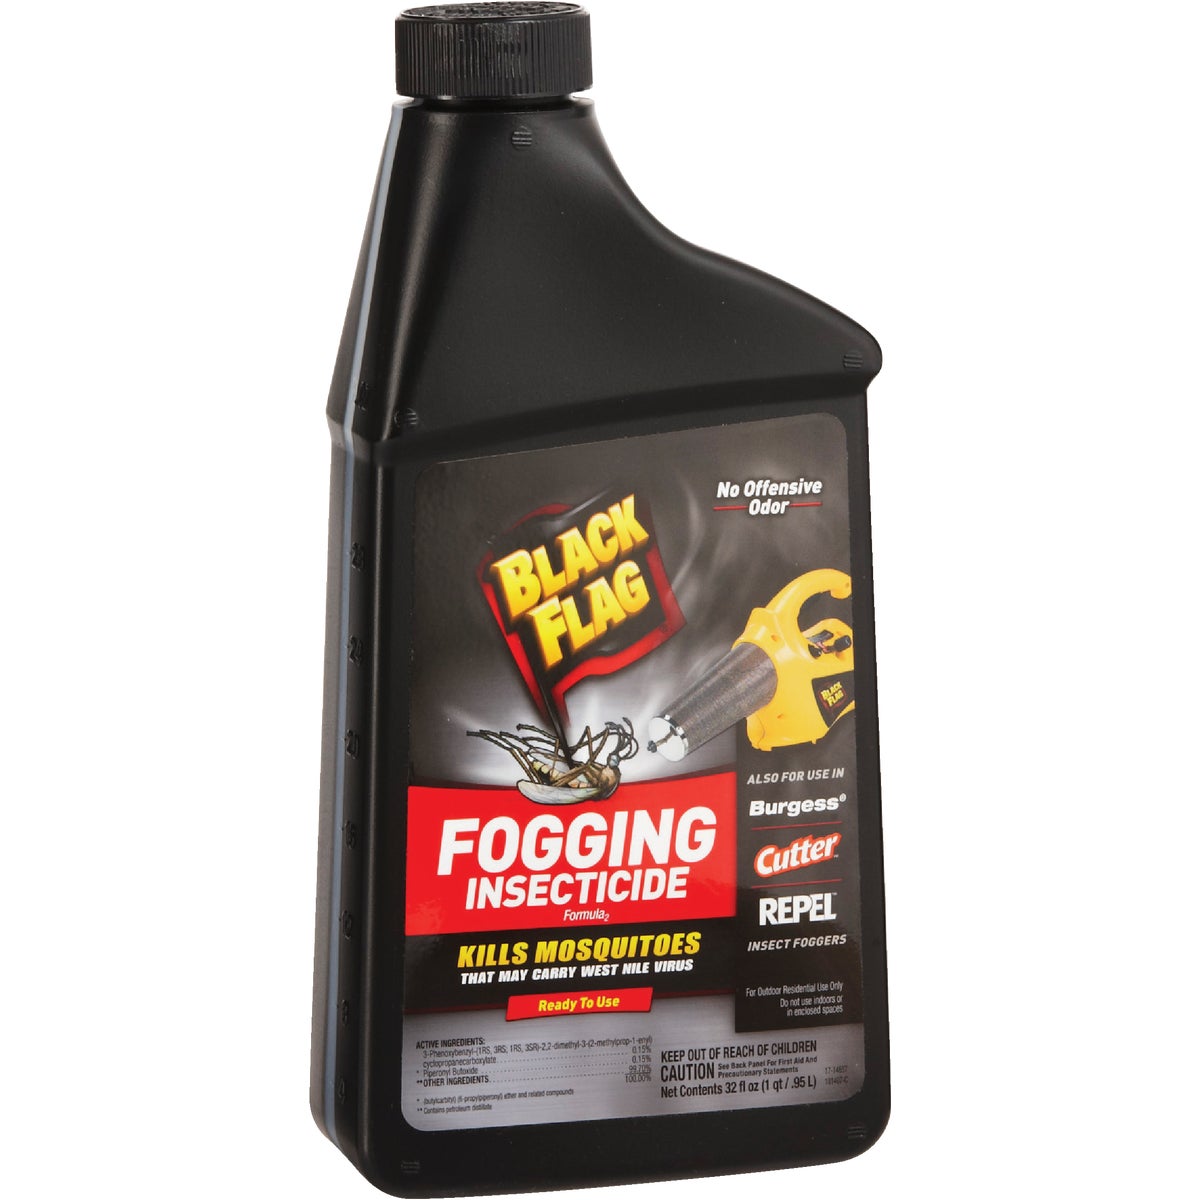 Outdoor Foggers & Fogger Insecticide